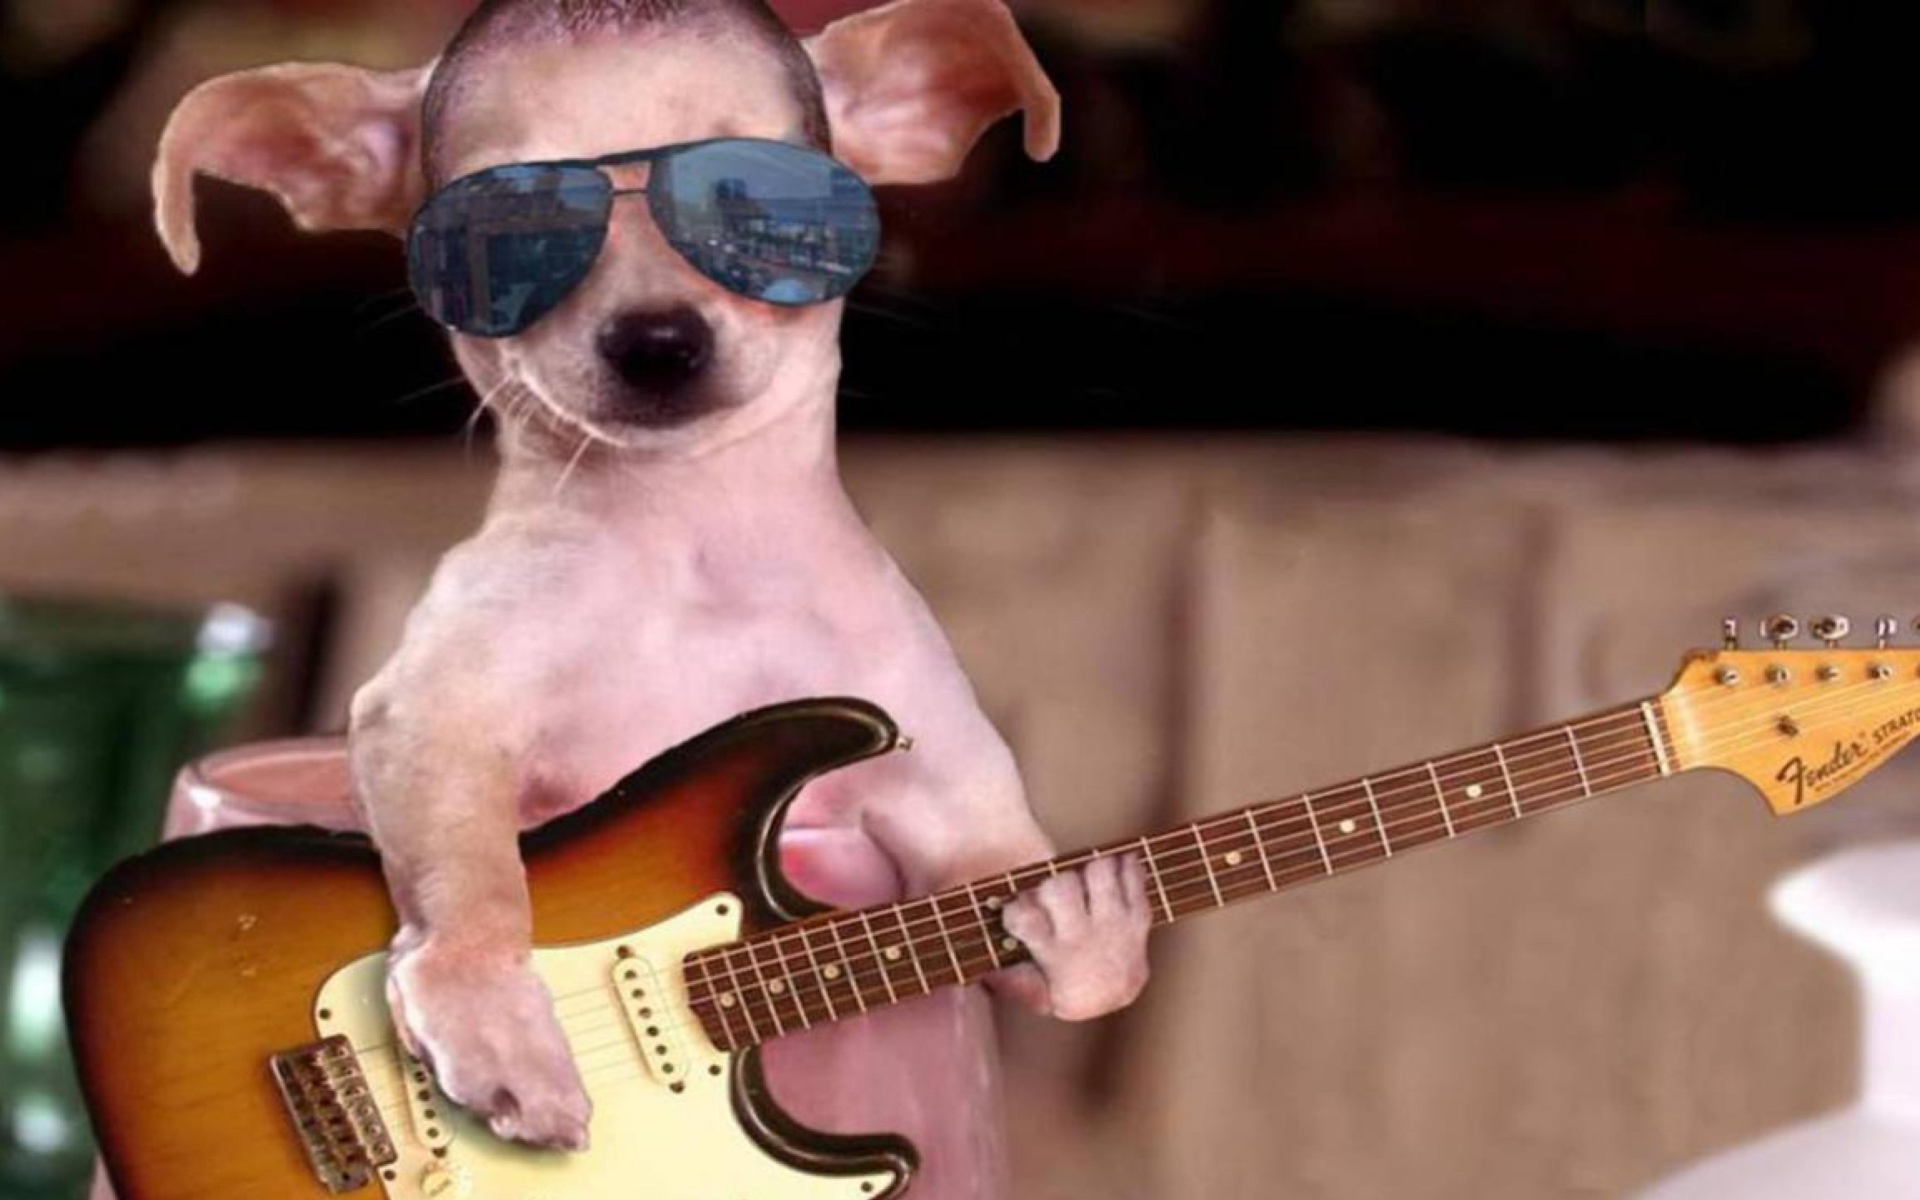 Funny Dog With Guitar wallpaper 1920x1200